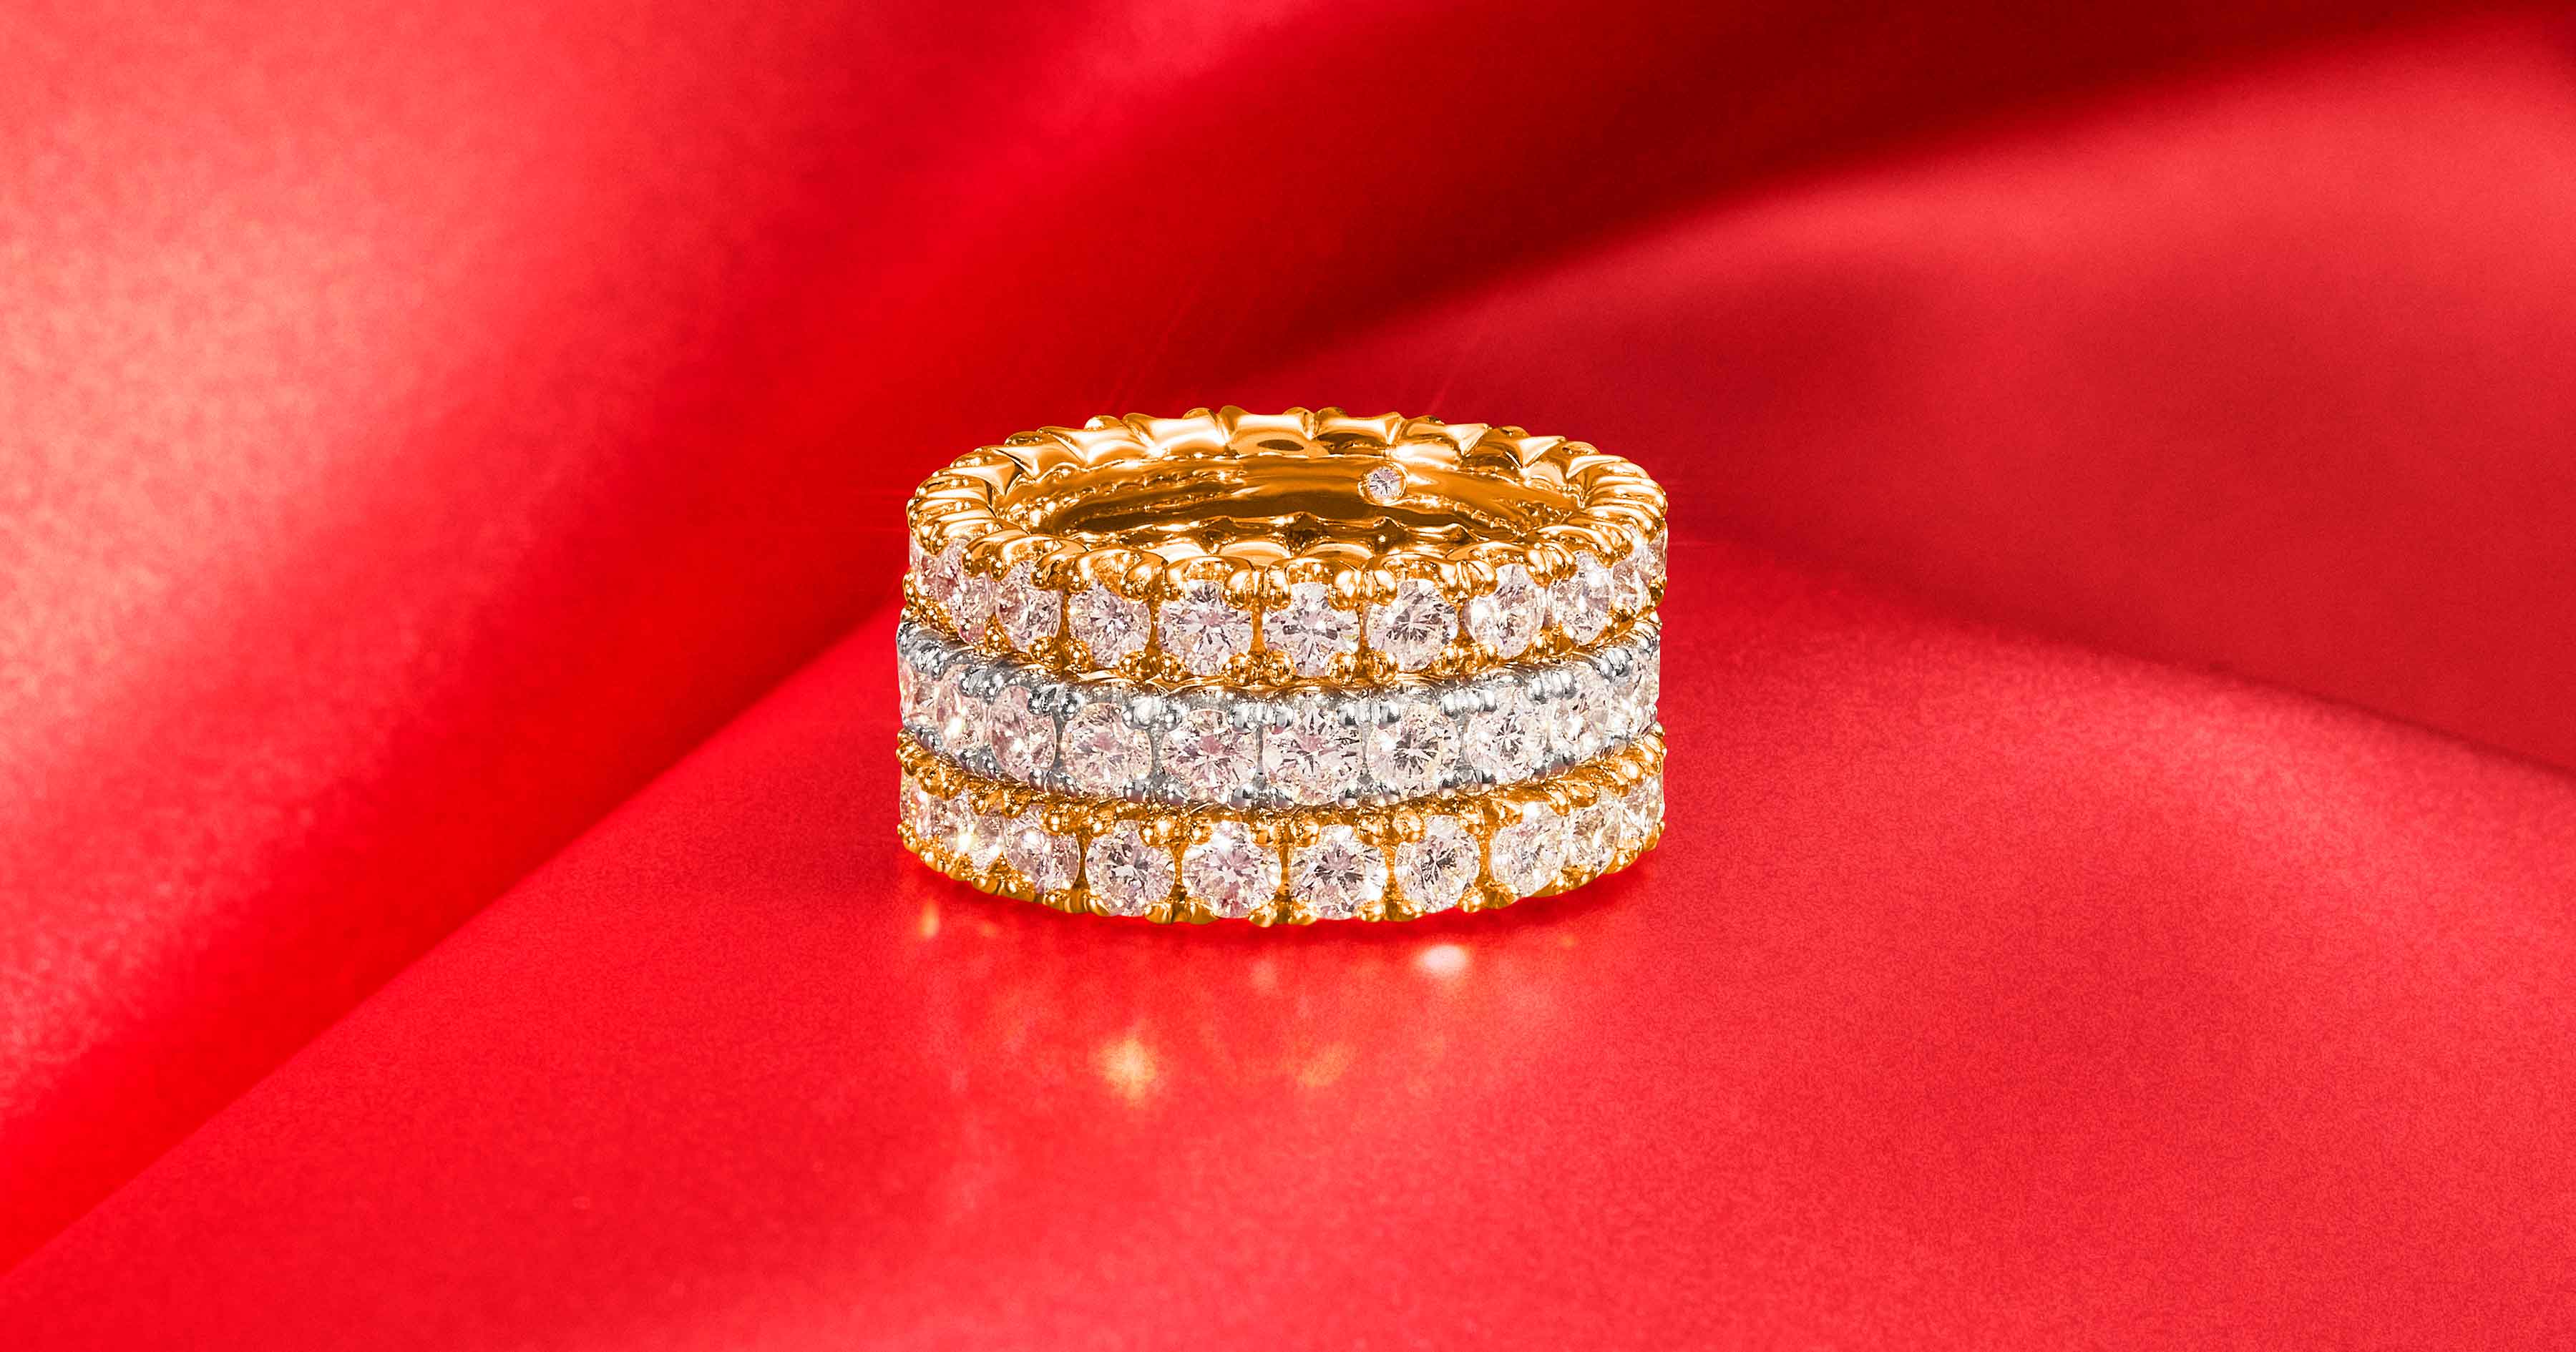 Engagement rings and wedding bands at RABAT Jewelry